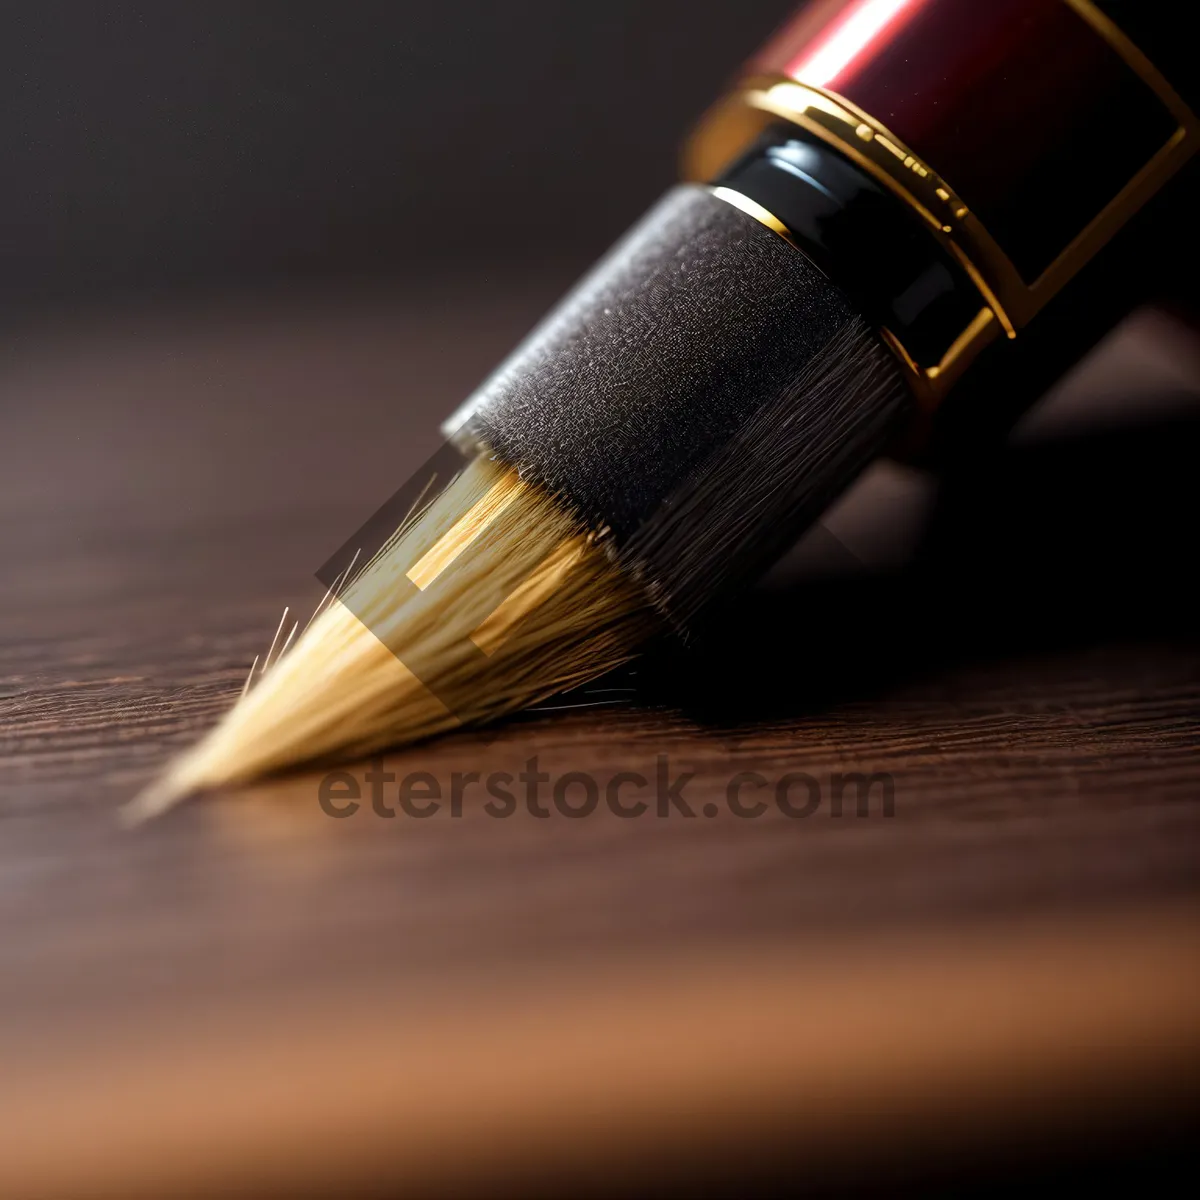 Picture of Pencil and Pen: Essential Writing Tools for Education and Business